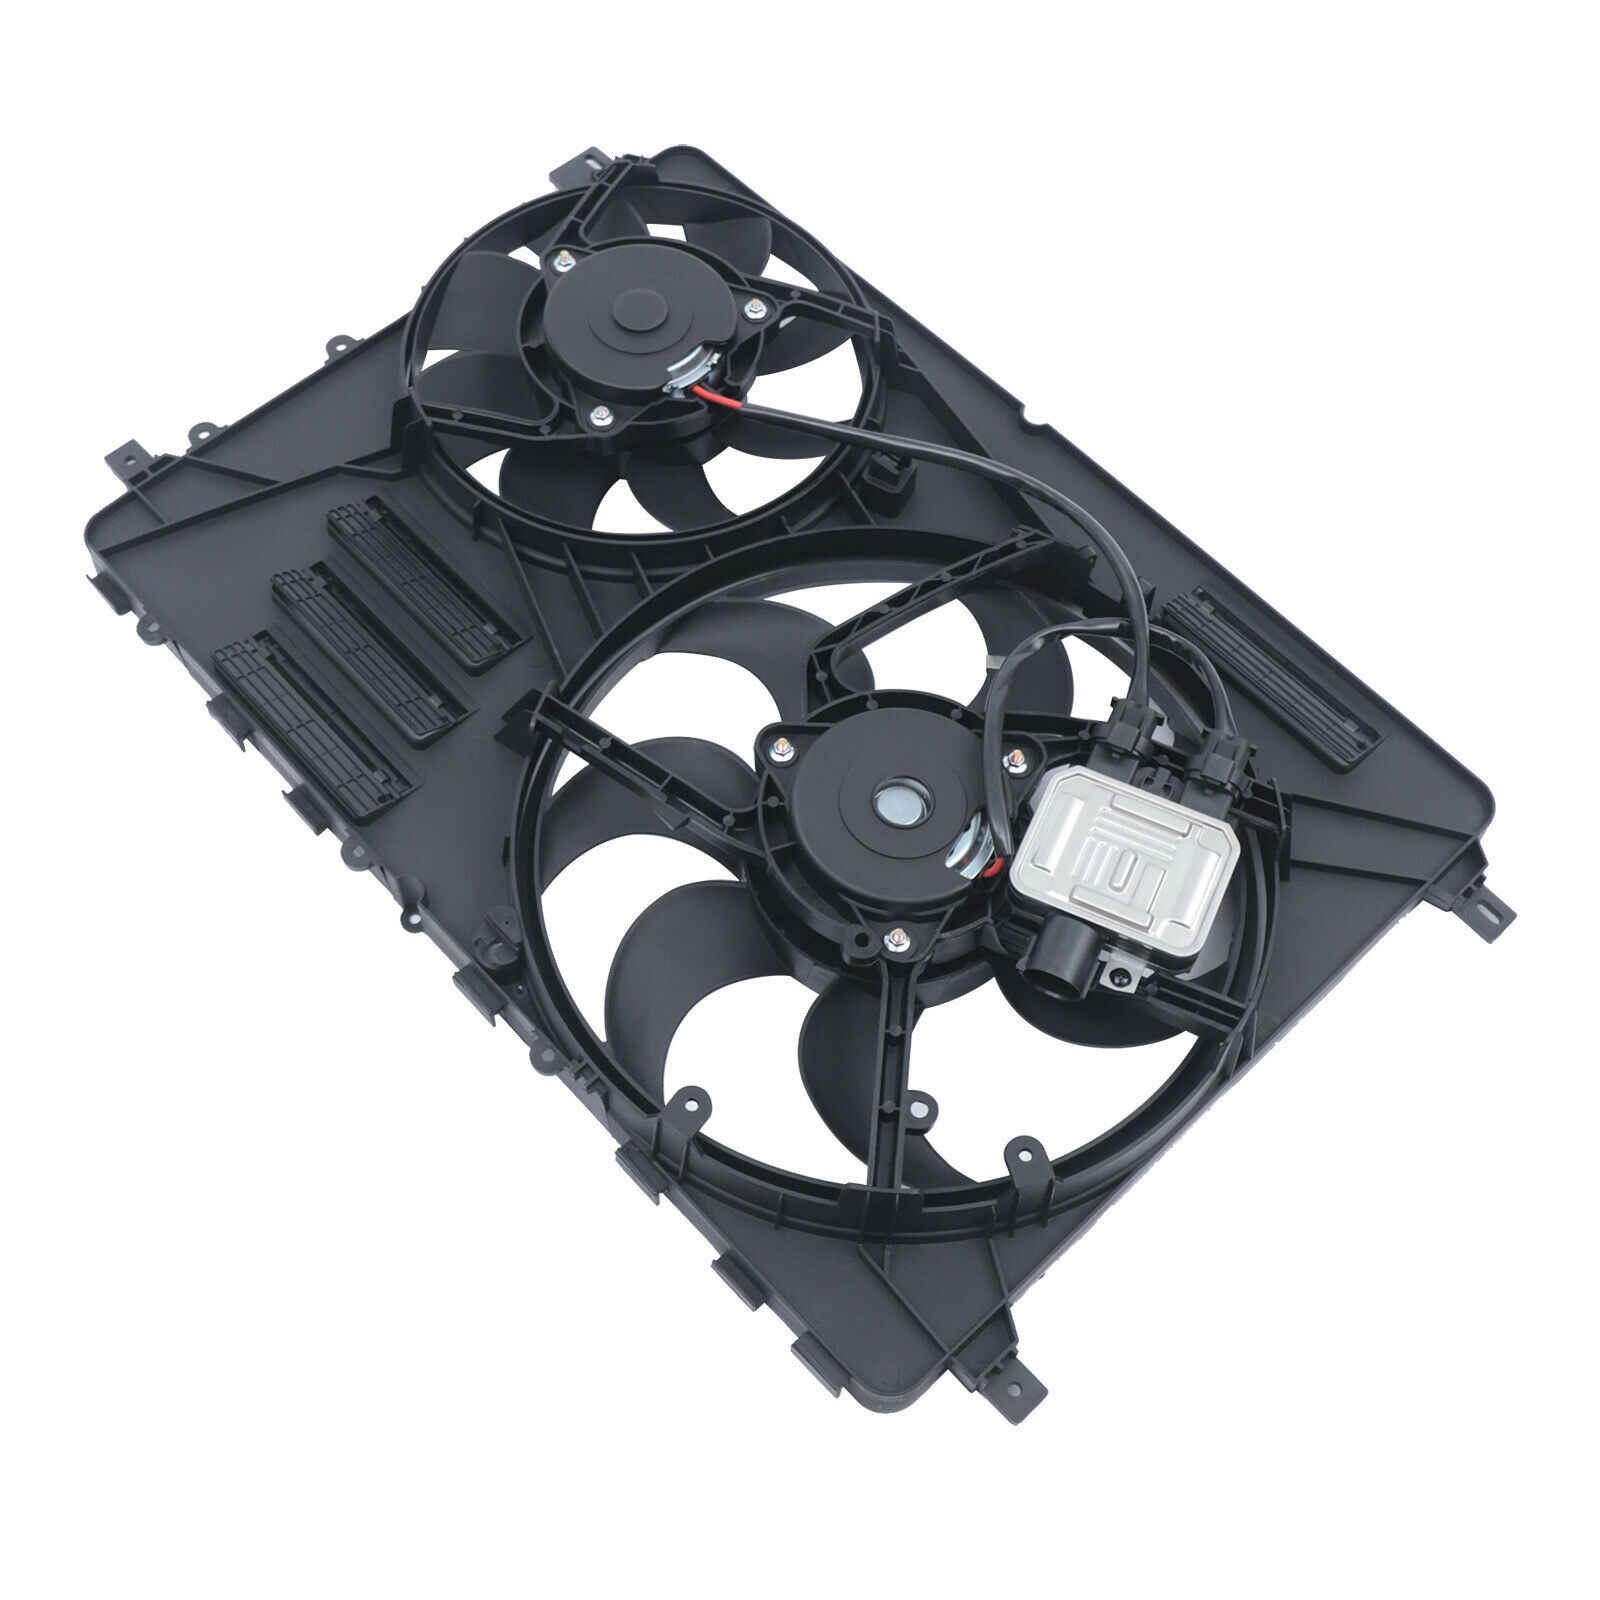 Cooling Fan Assembly for Volvo V70 S80 XC70 VO3115116 306686296,623840  Radiator Condenser Cooling Fan For 08-16 Volvo S80 V60 V70 XC60 XC70  306686296 